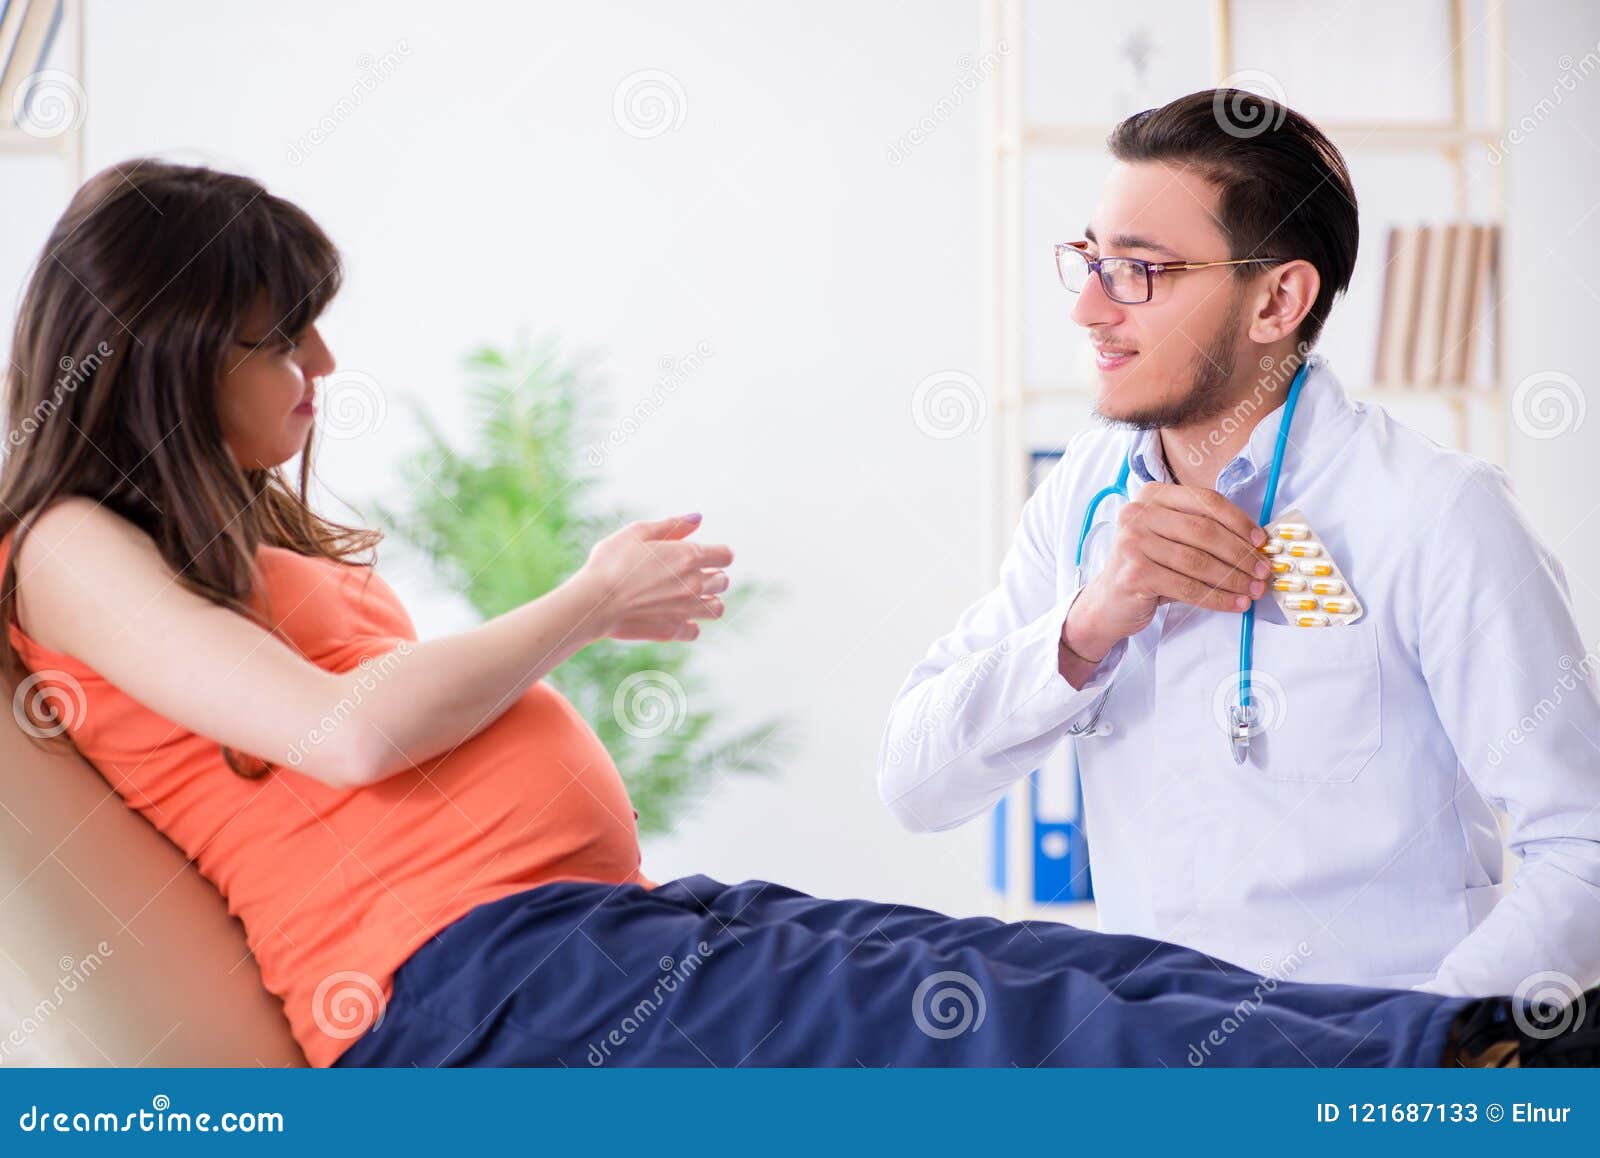 The Pregnant Woman With Her Husband Visiting The Doctor In Clinic Stock